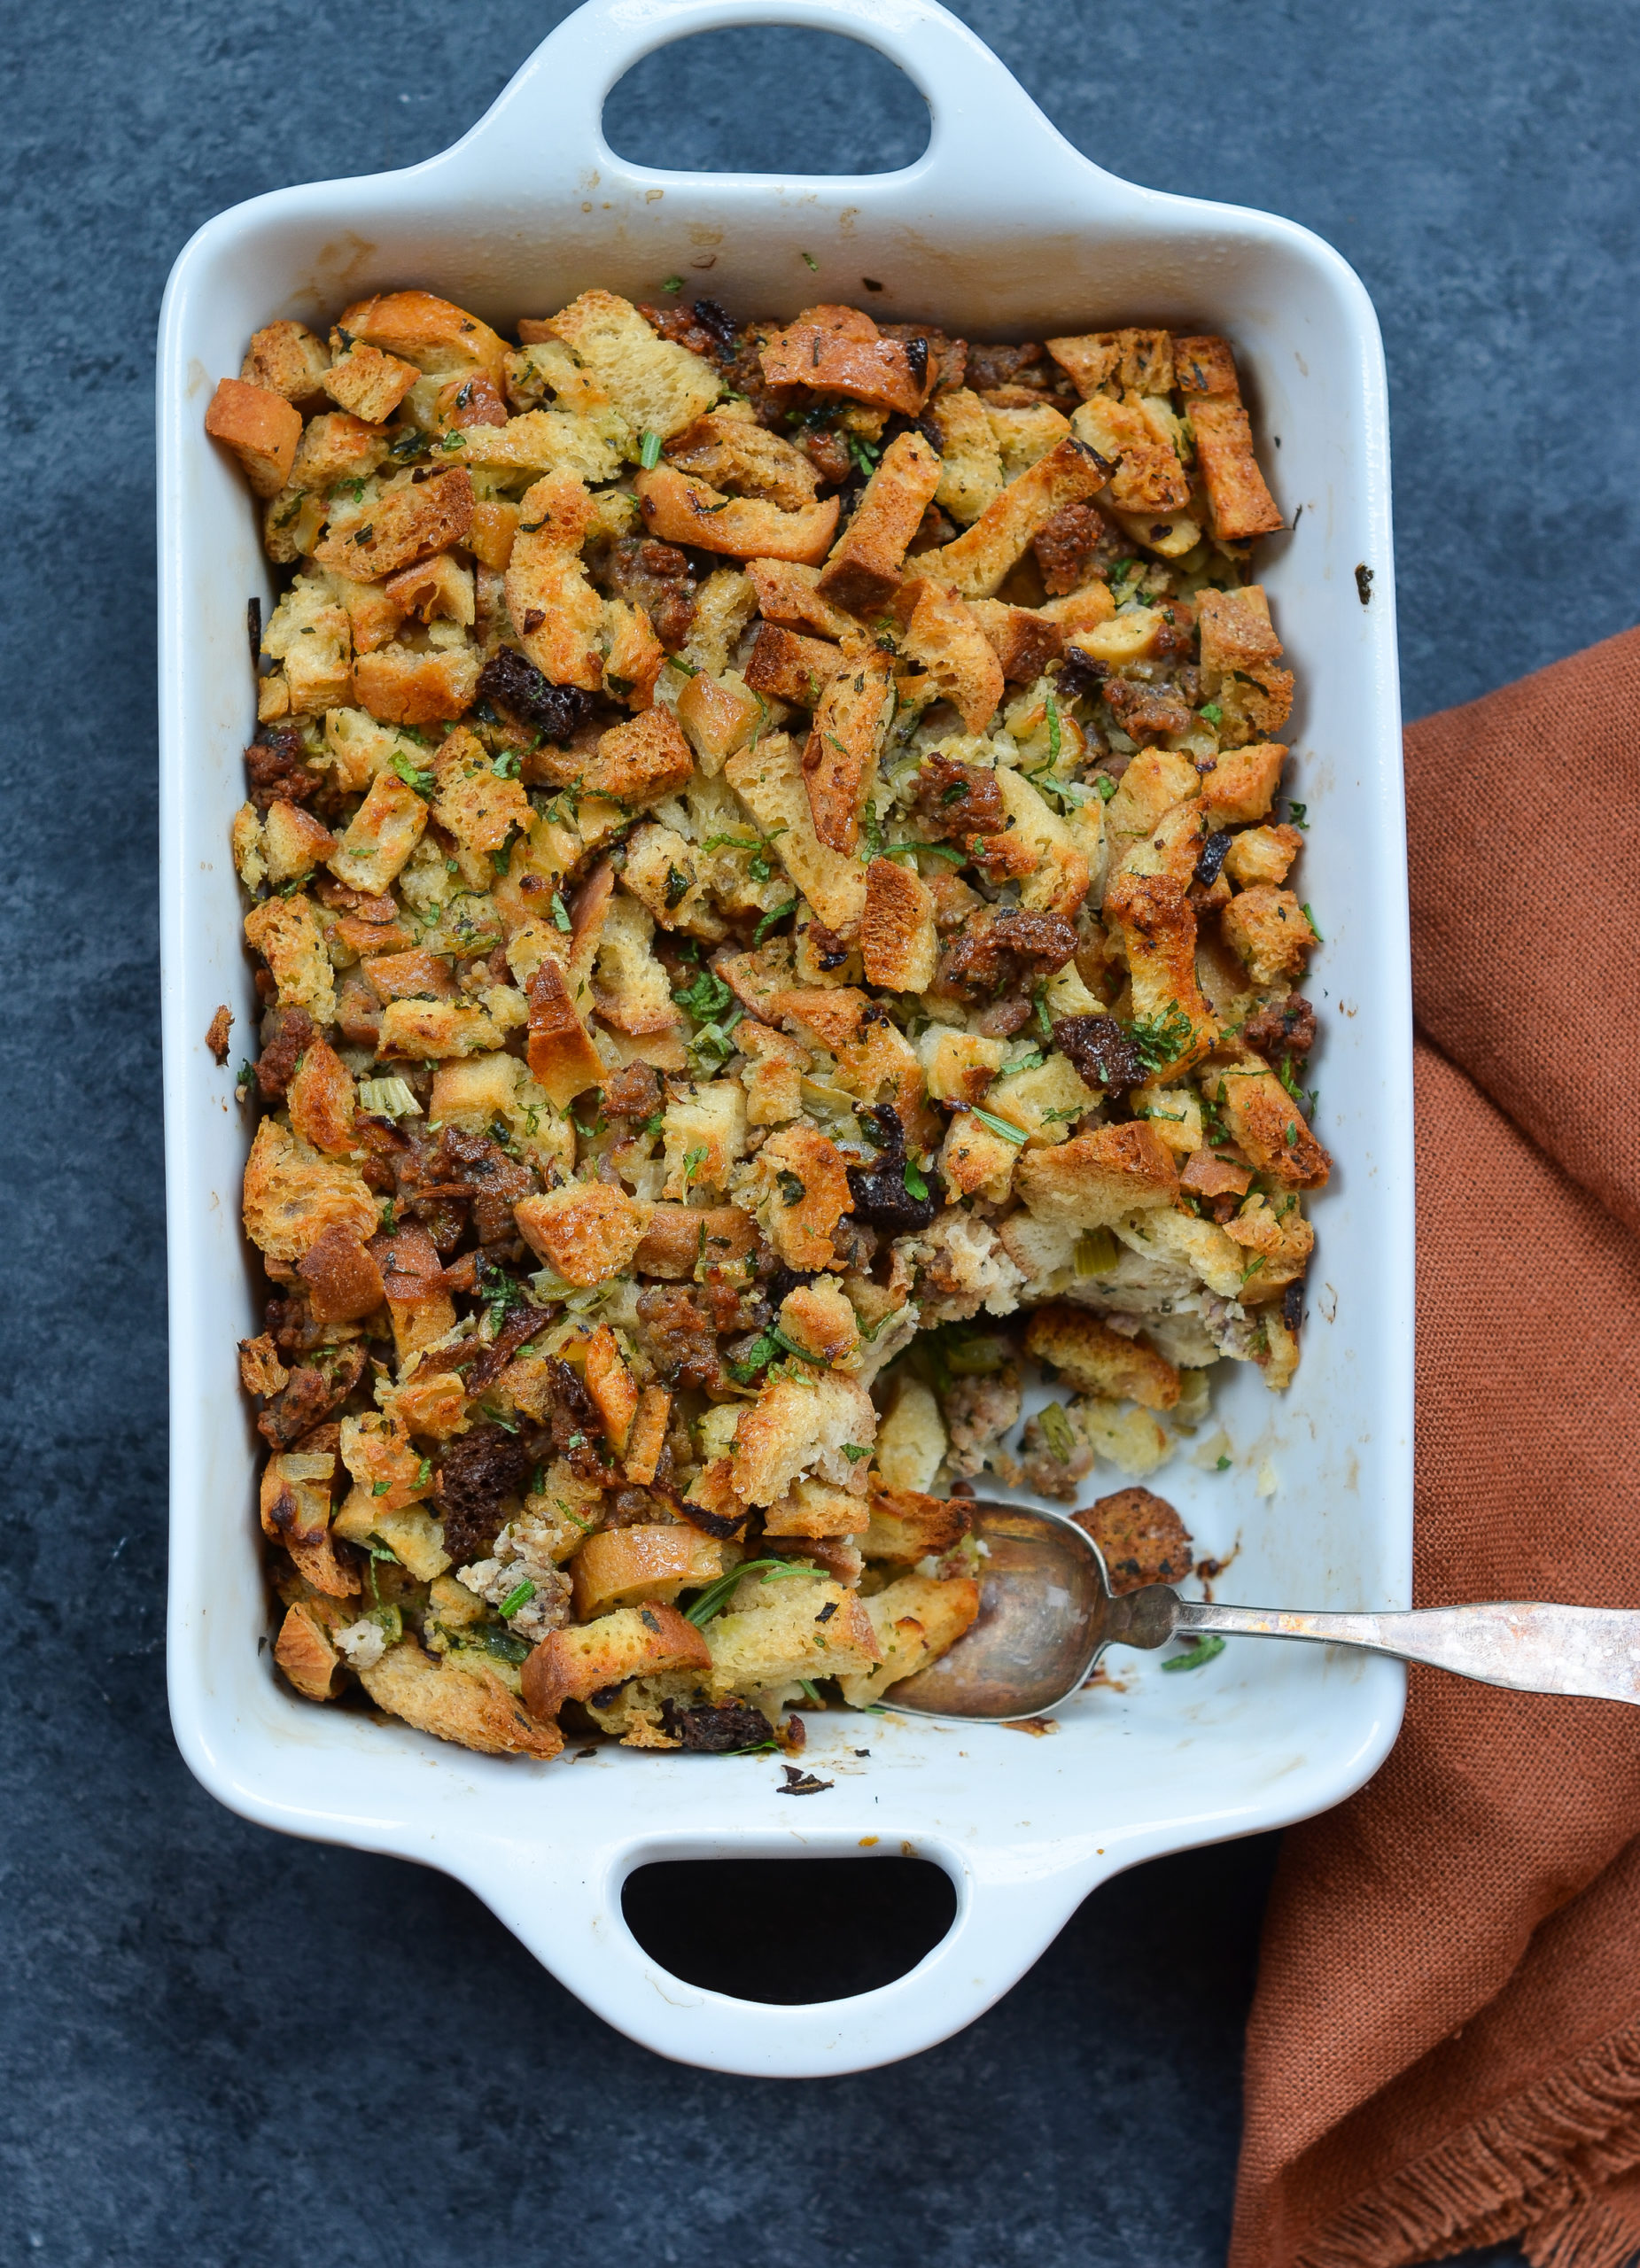 https://www.onceuponachef.com/images/2014/11/Sausage-Stuffing-6-scaled.jpg